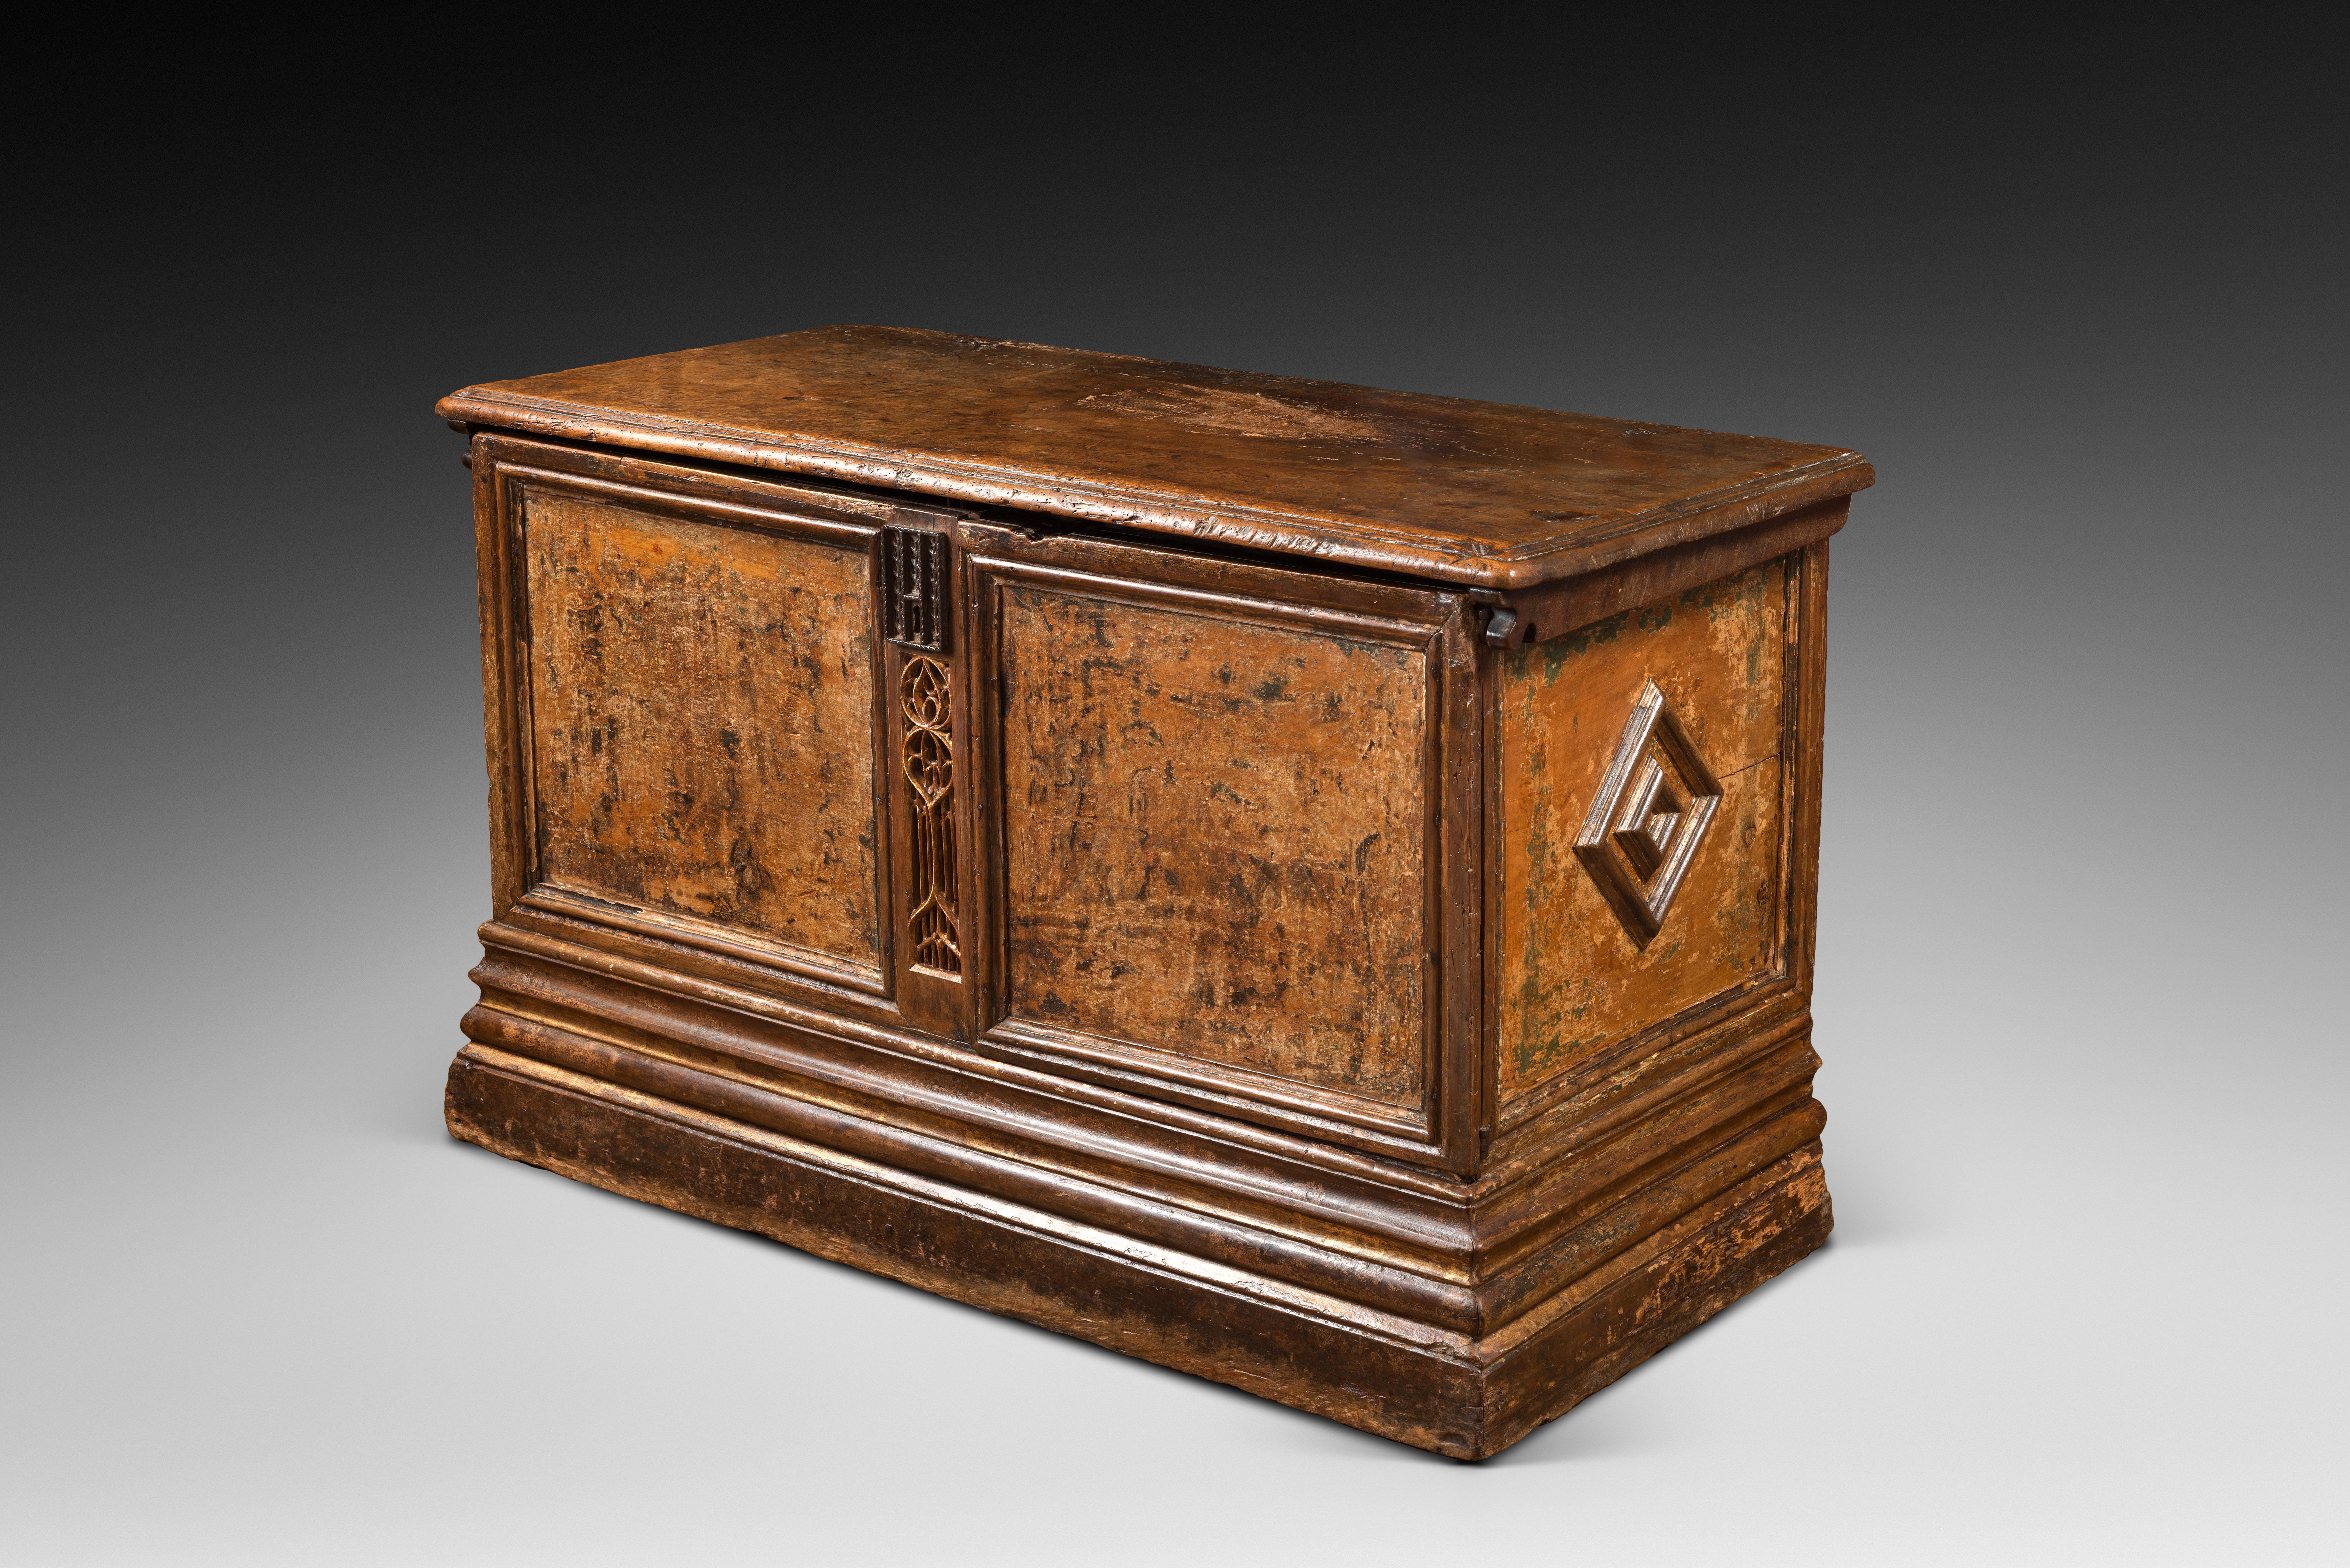 15th century furniture for sale